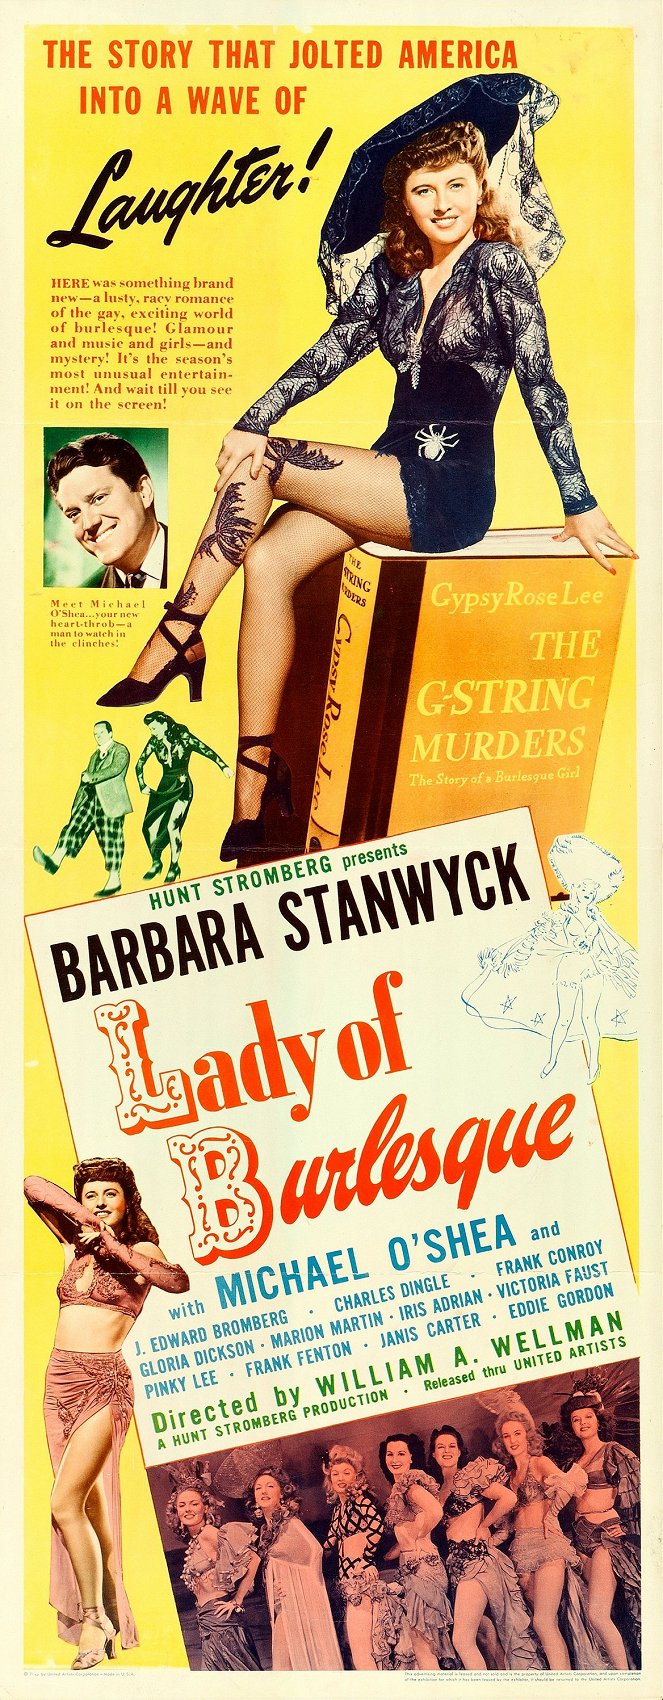 Lady of Burlesque - Plakate